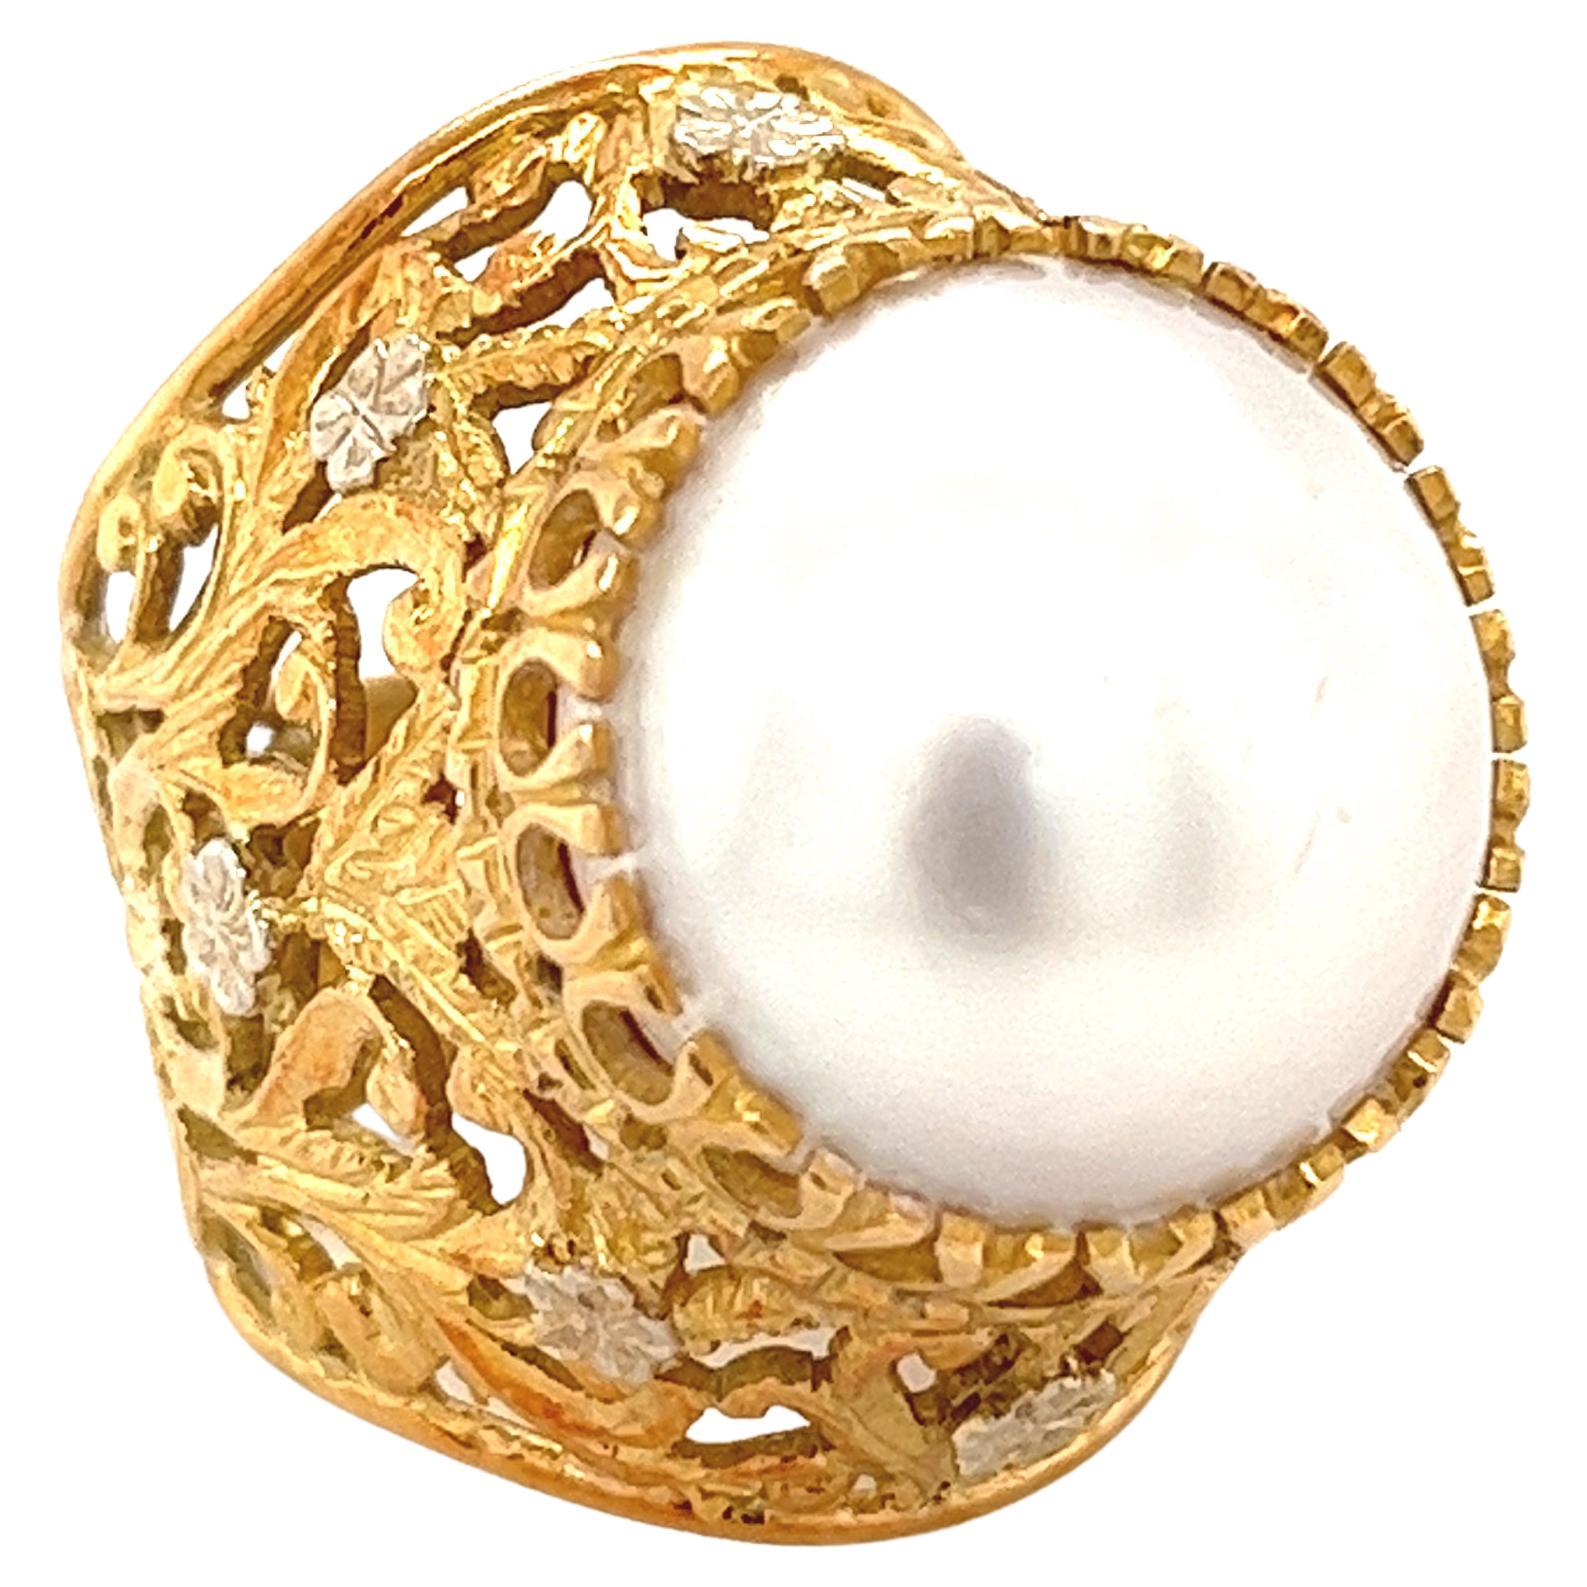 Vintage Floral White Pearl Pinky Ring in 18k Yellow Gold Bezel Setting